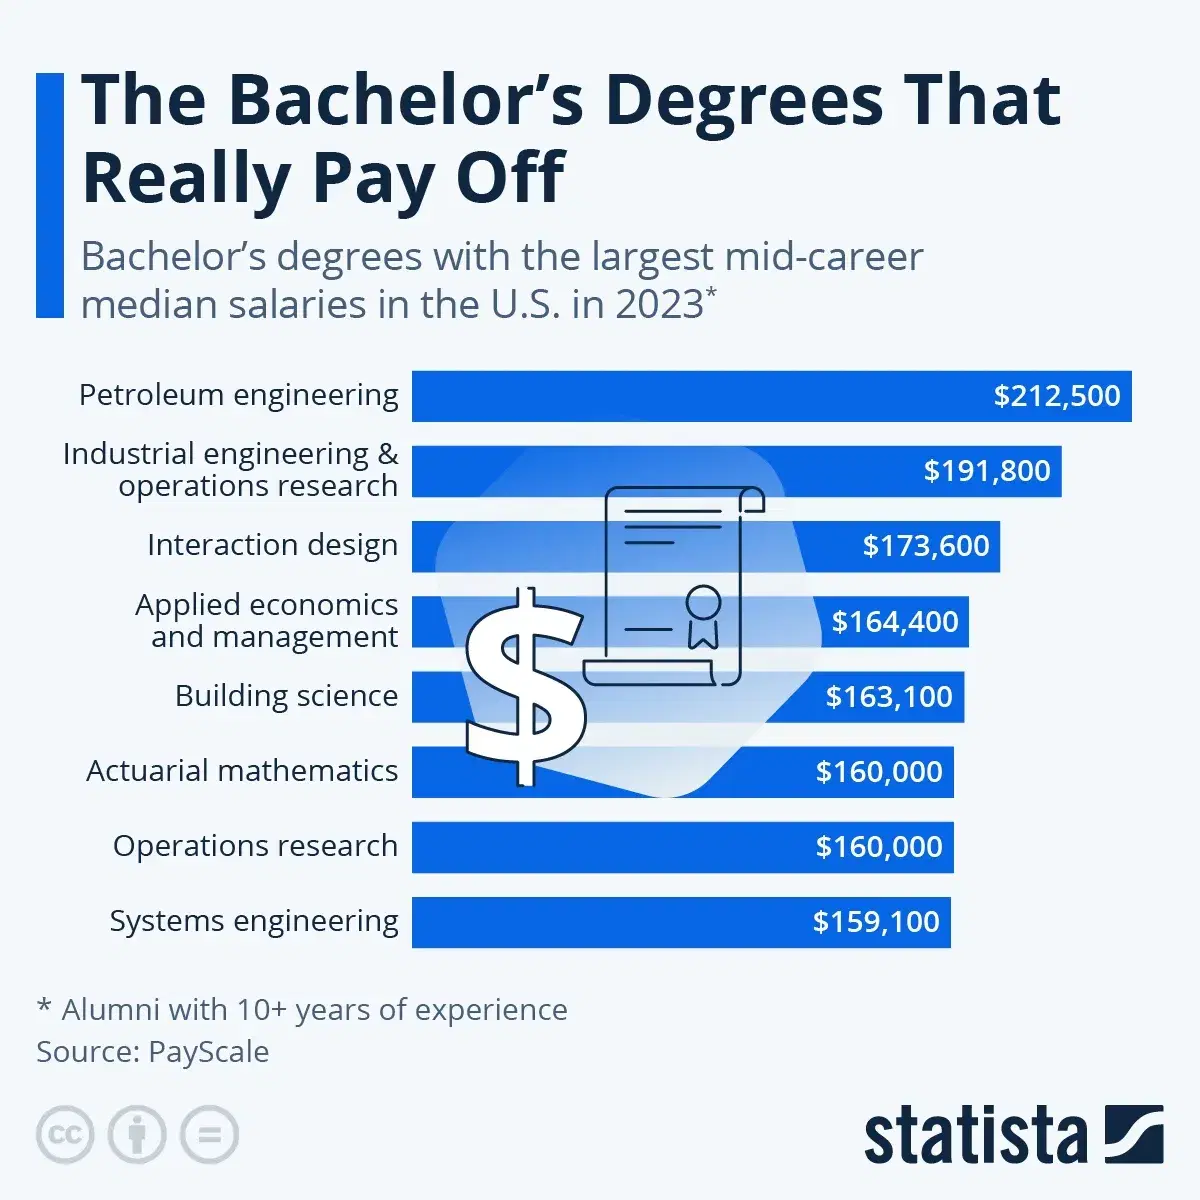 The Bachelor's Degrees that Really Pay Off